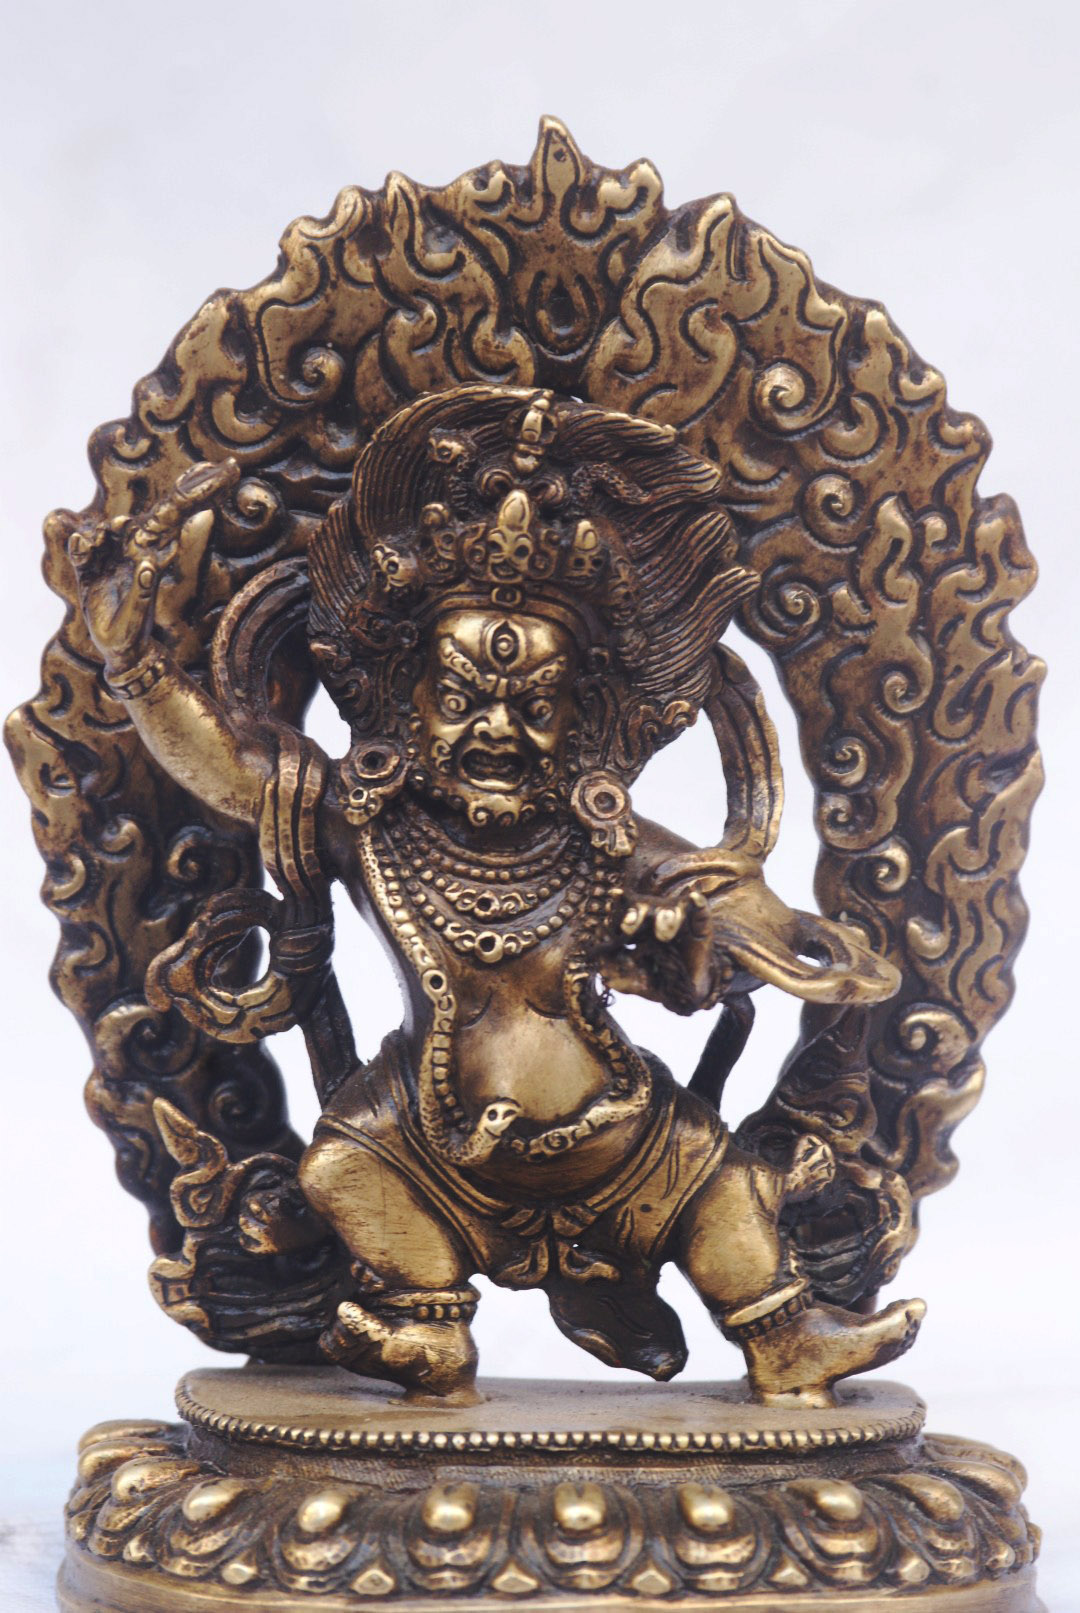 Vajrapani Statue, bronze, old Post, remakable